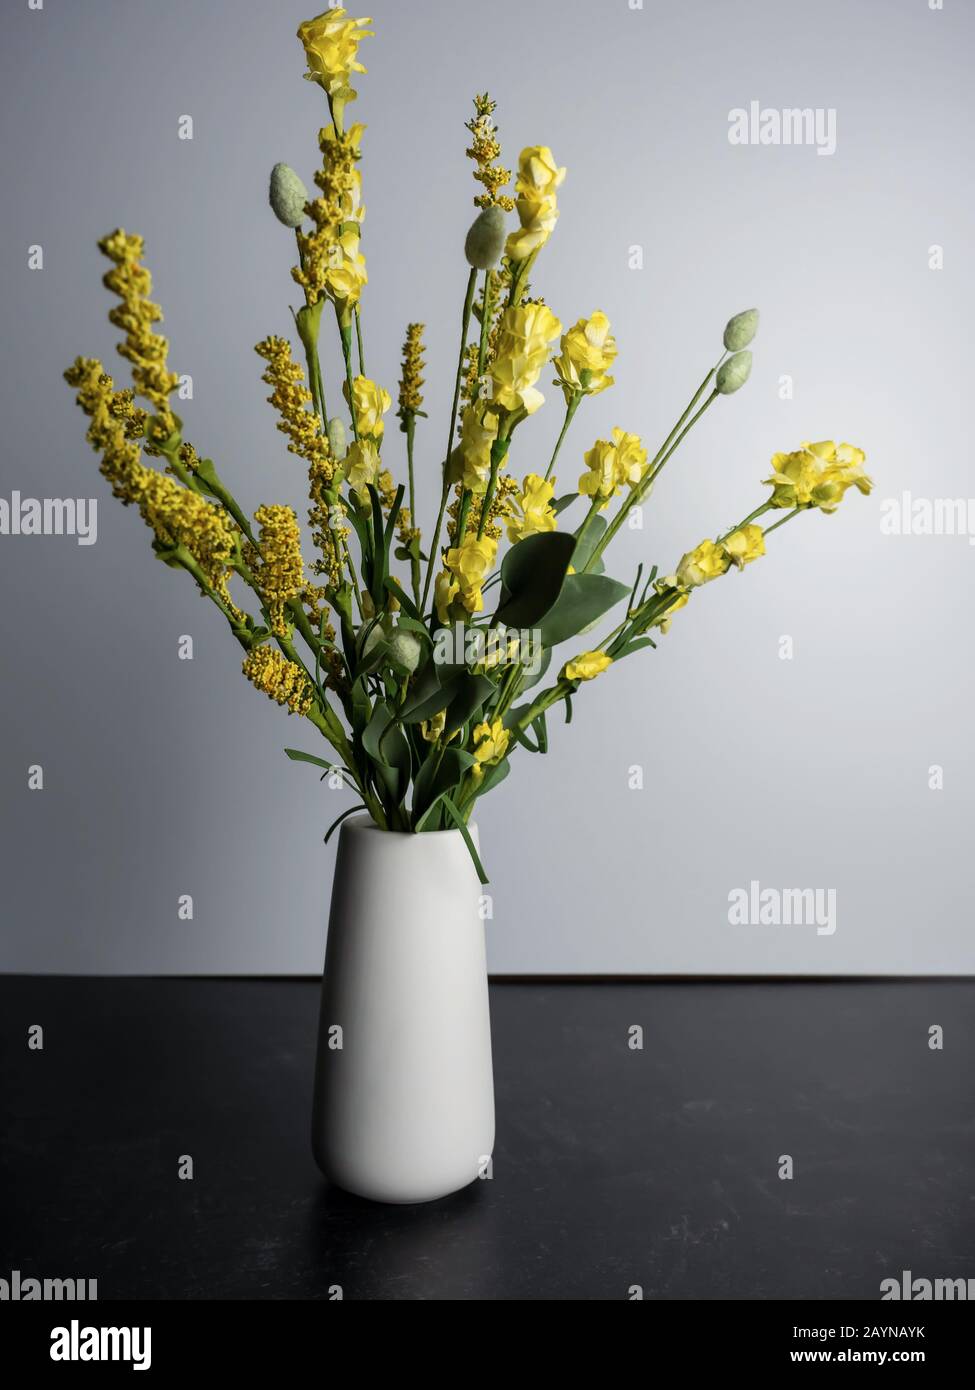 Yellow Artificial Flower Arrangement In A Simple White Base On A Black Slate And White Background Stock Photo Alamy